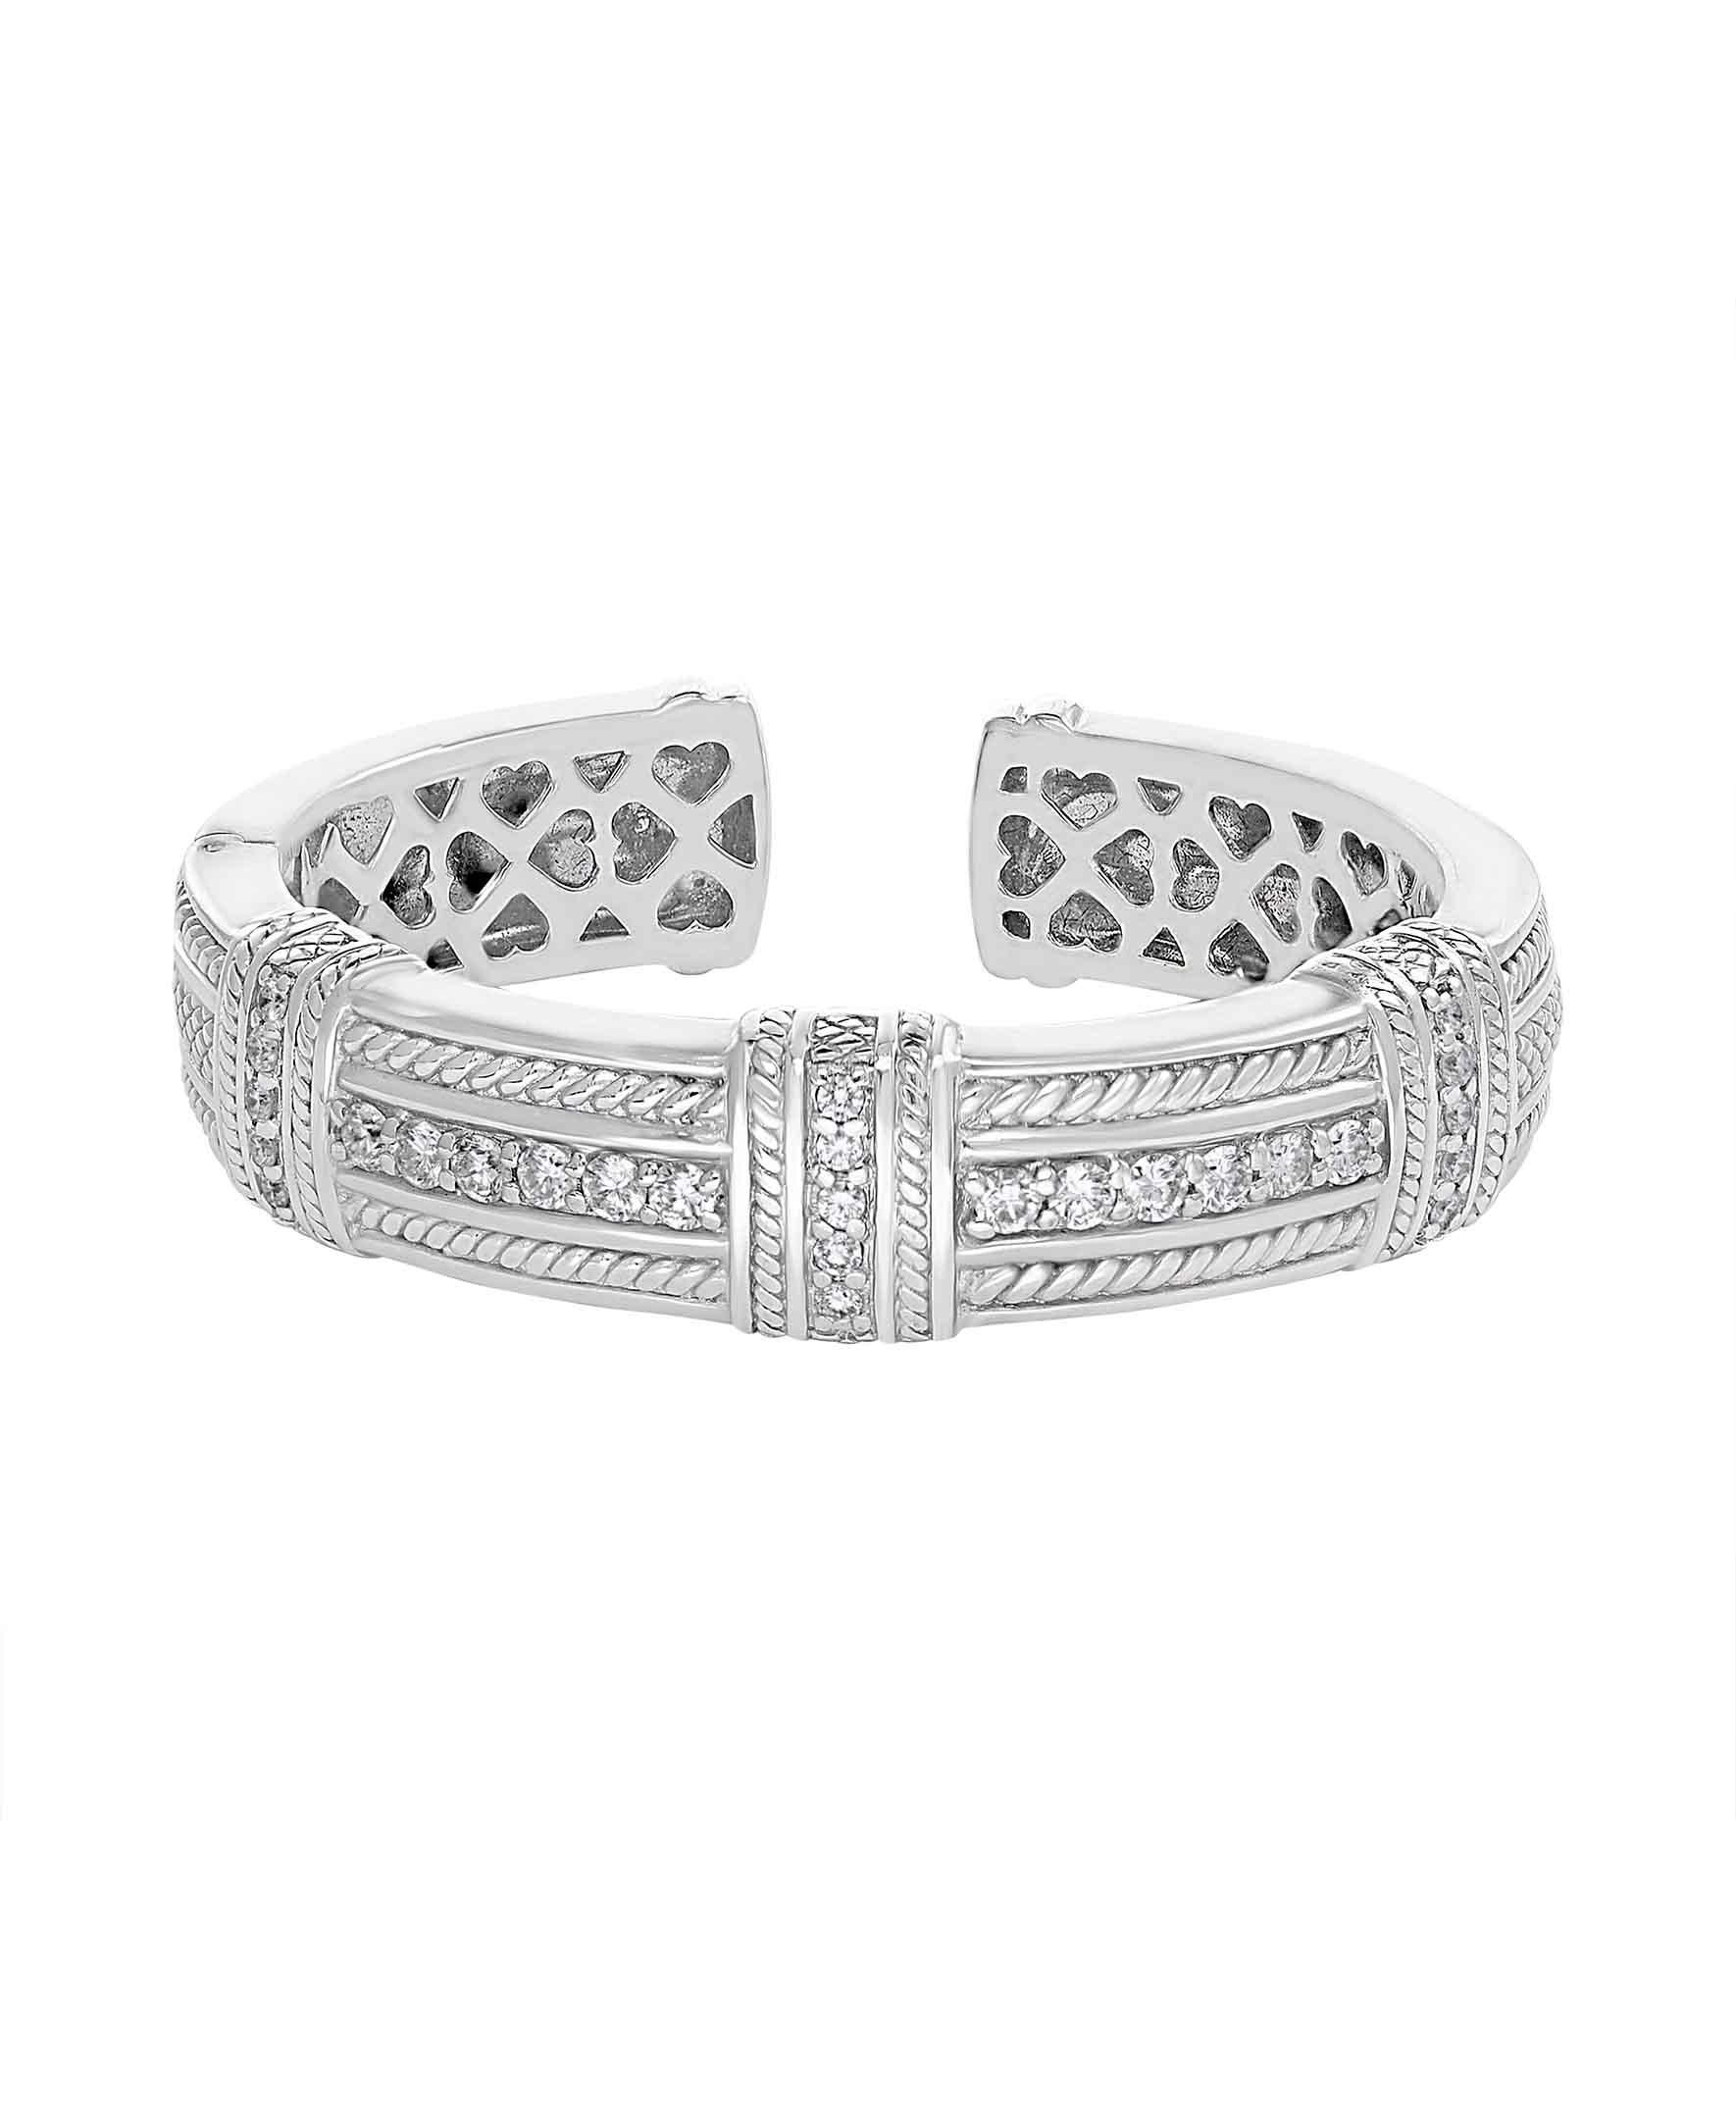 2.2 Ct Diamonds 18 Karat white Gold Cuff Bangle Bracelet By Judith Ripka
Very High Quality of Diamonds 
Clarity : VS1
Color : G
Signed JRIPKA

A spectacular extremely fine jewelry piece. This exceptional Bangle bracelet has Two Horizontal and Three